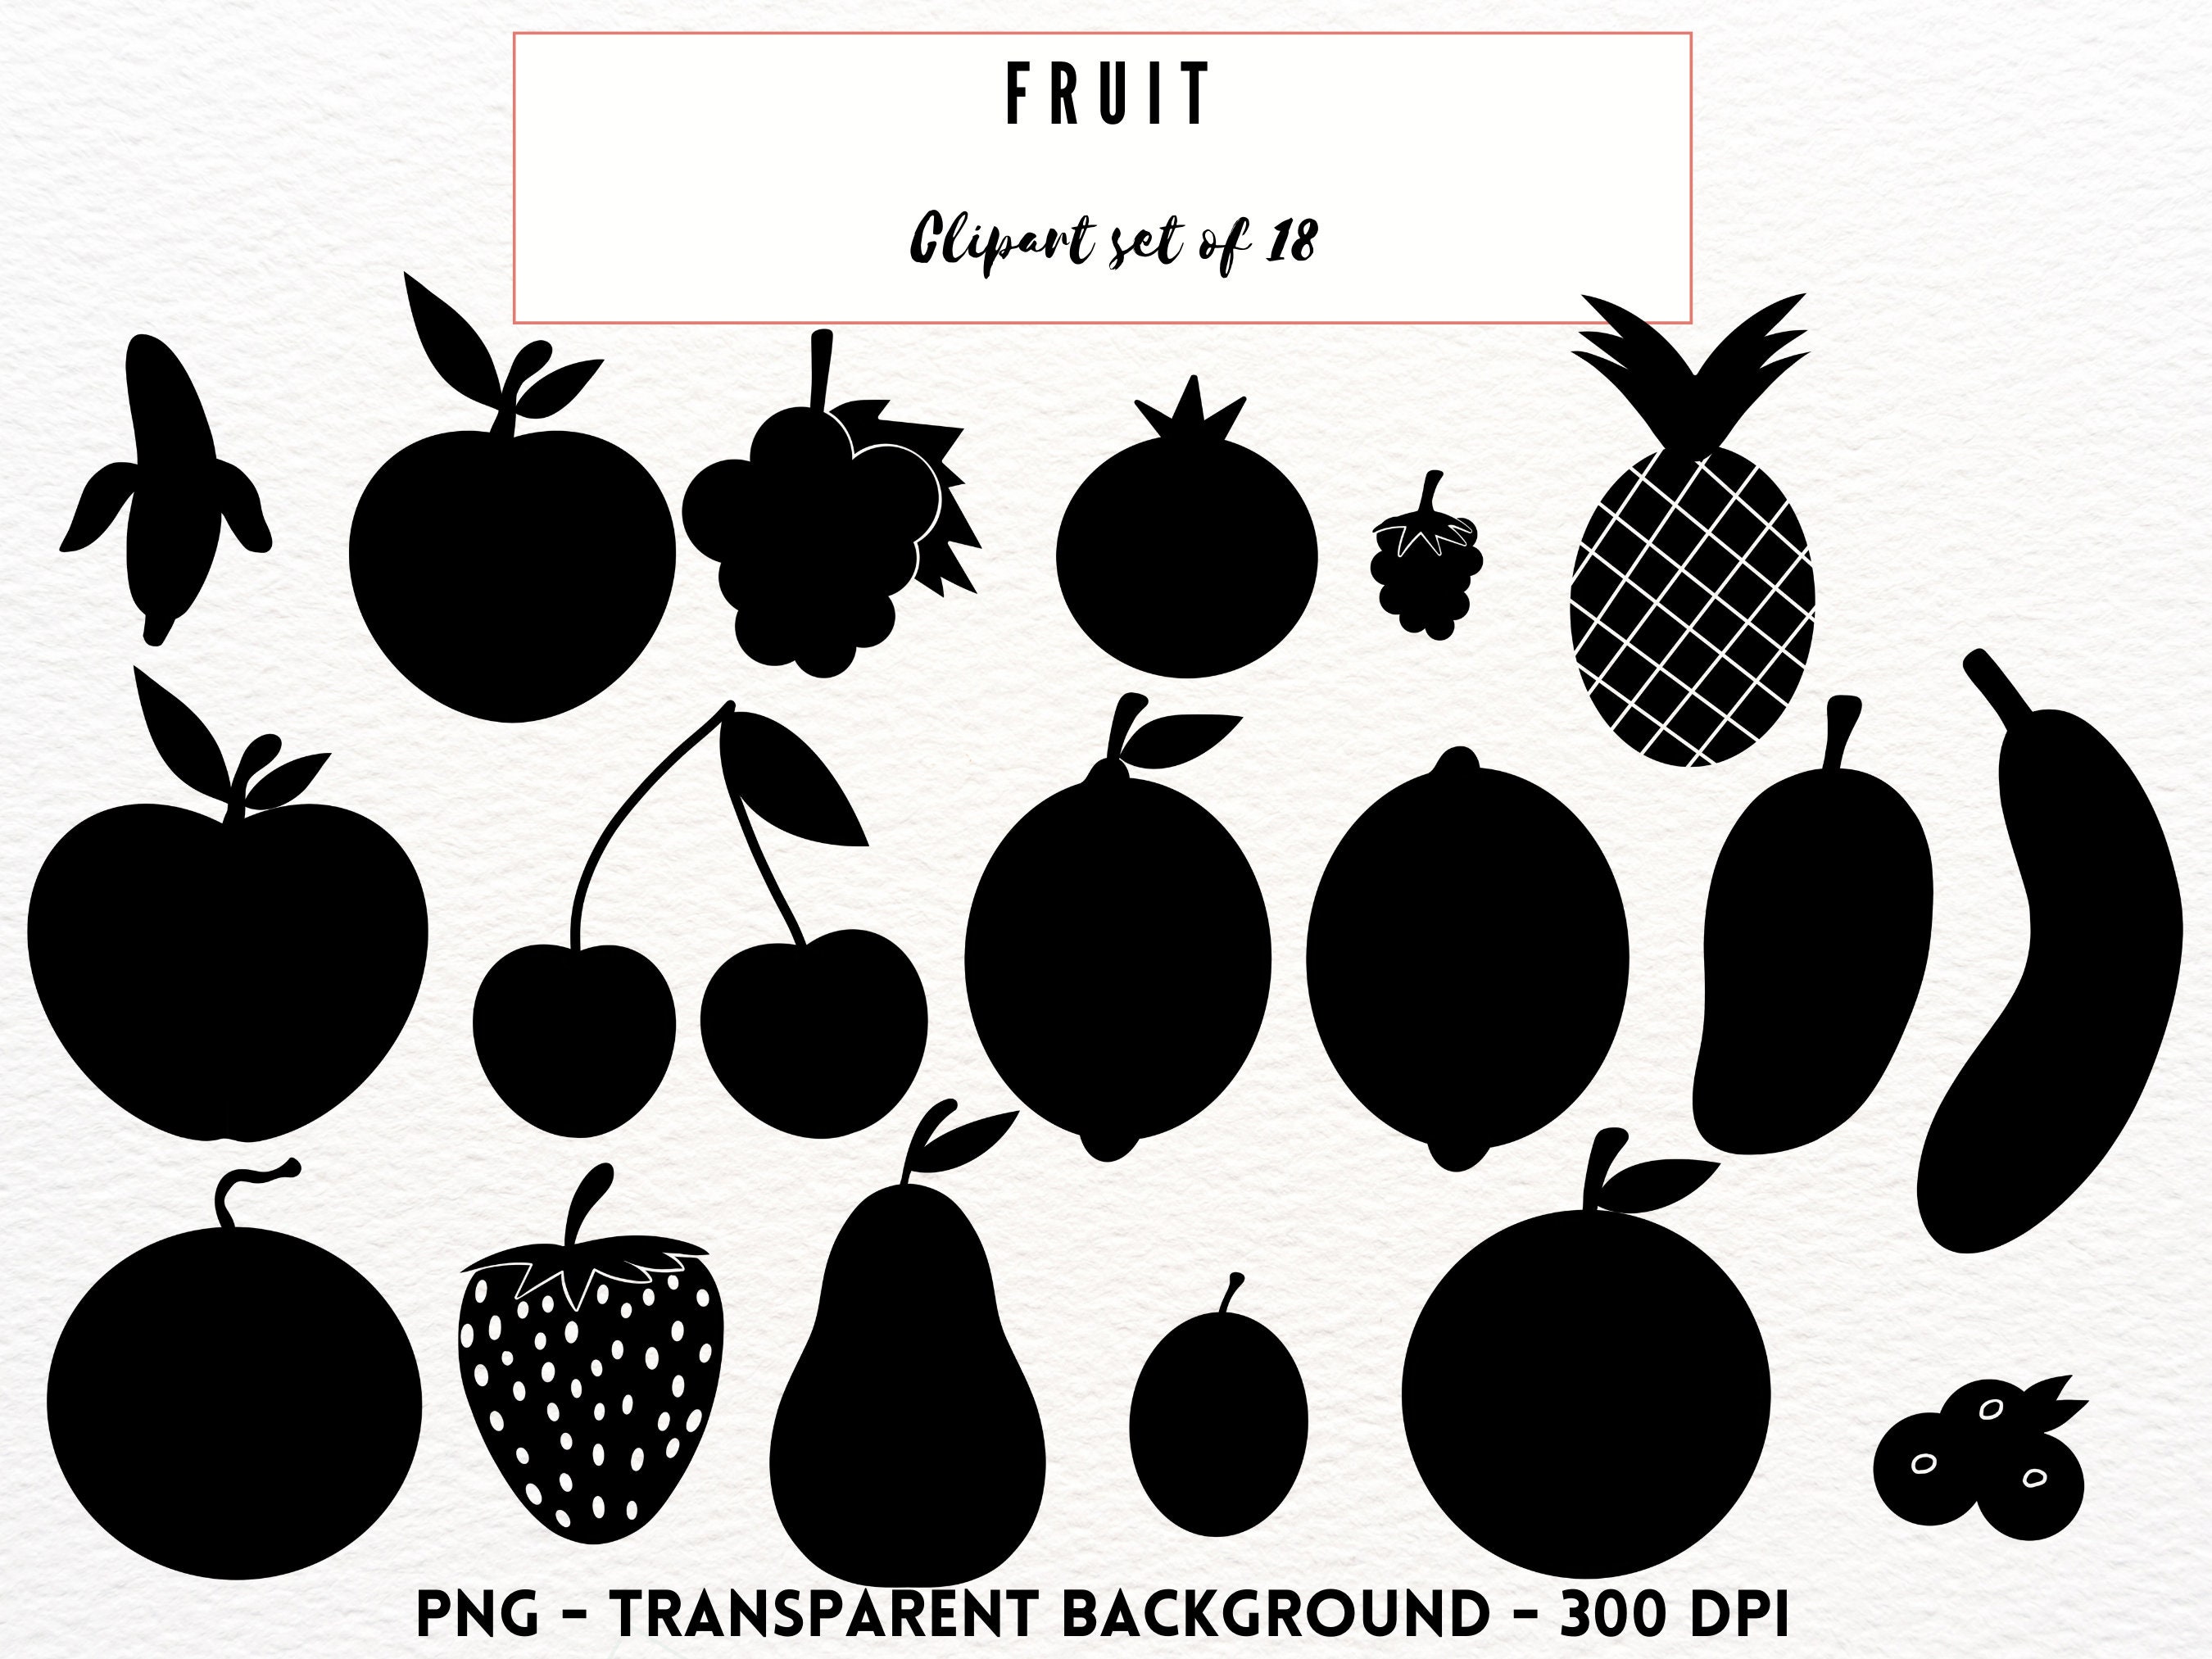 Large Fruit Tree Stencil Reusable Wall Stencils for DIY 